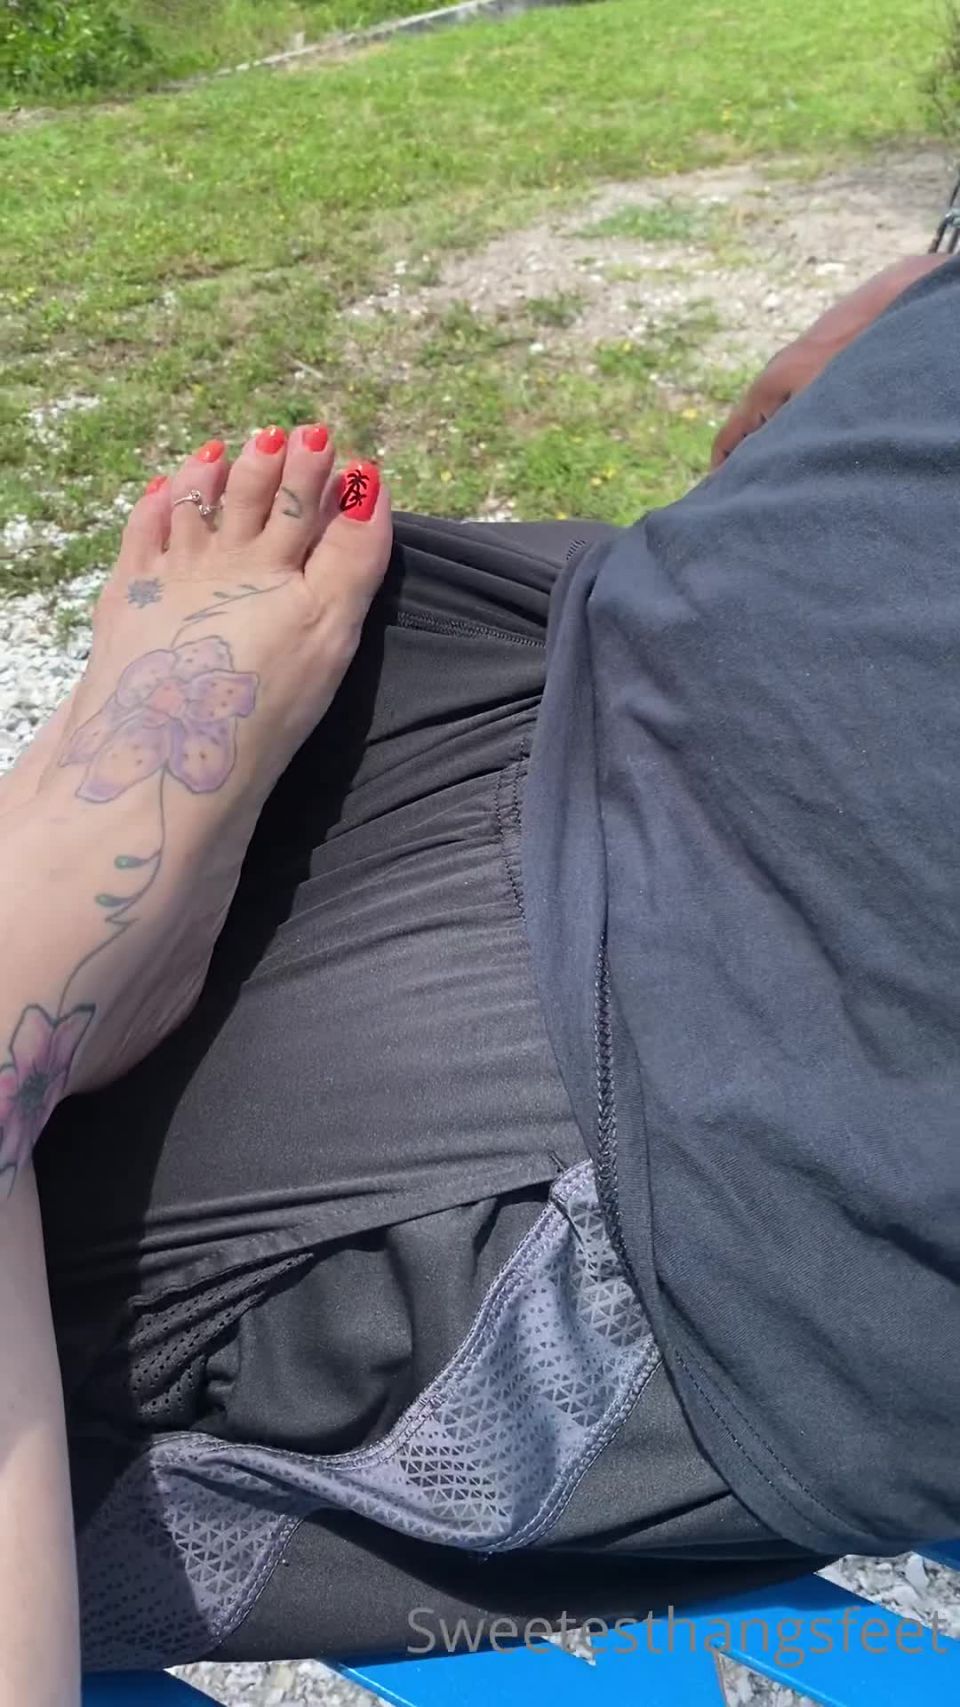 sweetesthangsfeet  84914304 public display of affection anyone i personally,  on public 